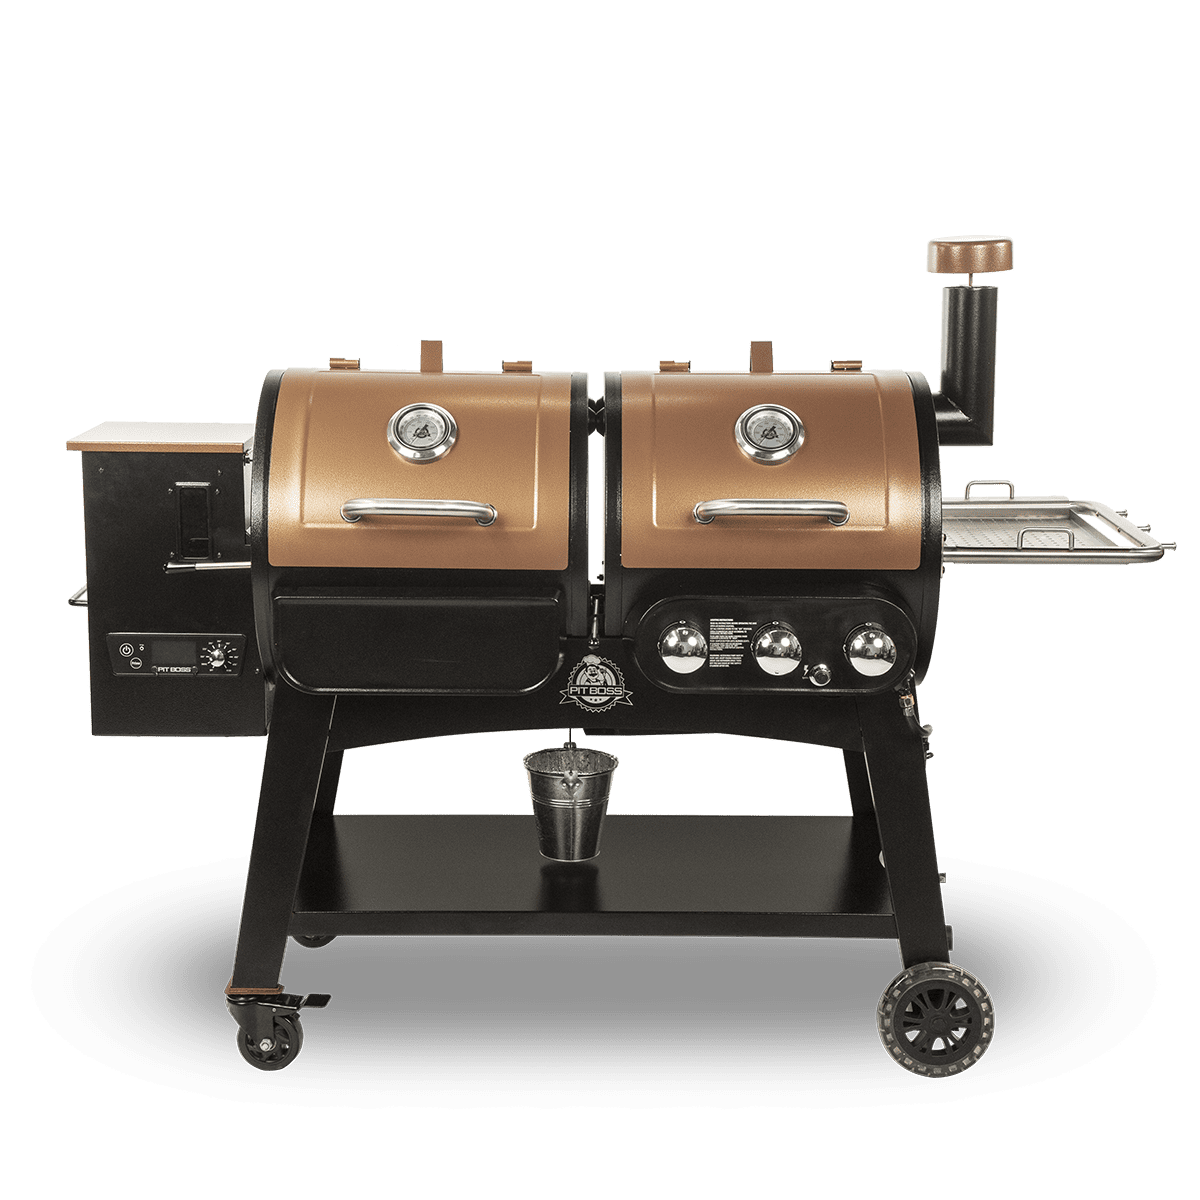 grill boss gas grill